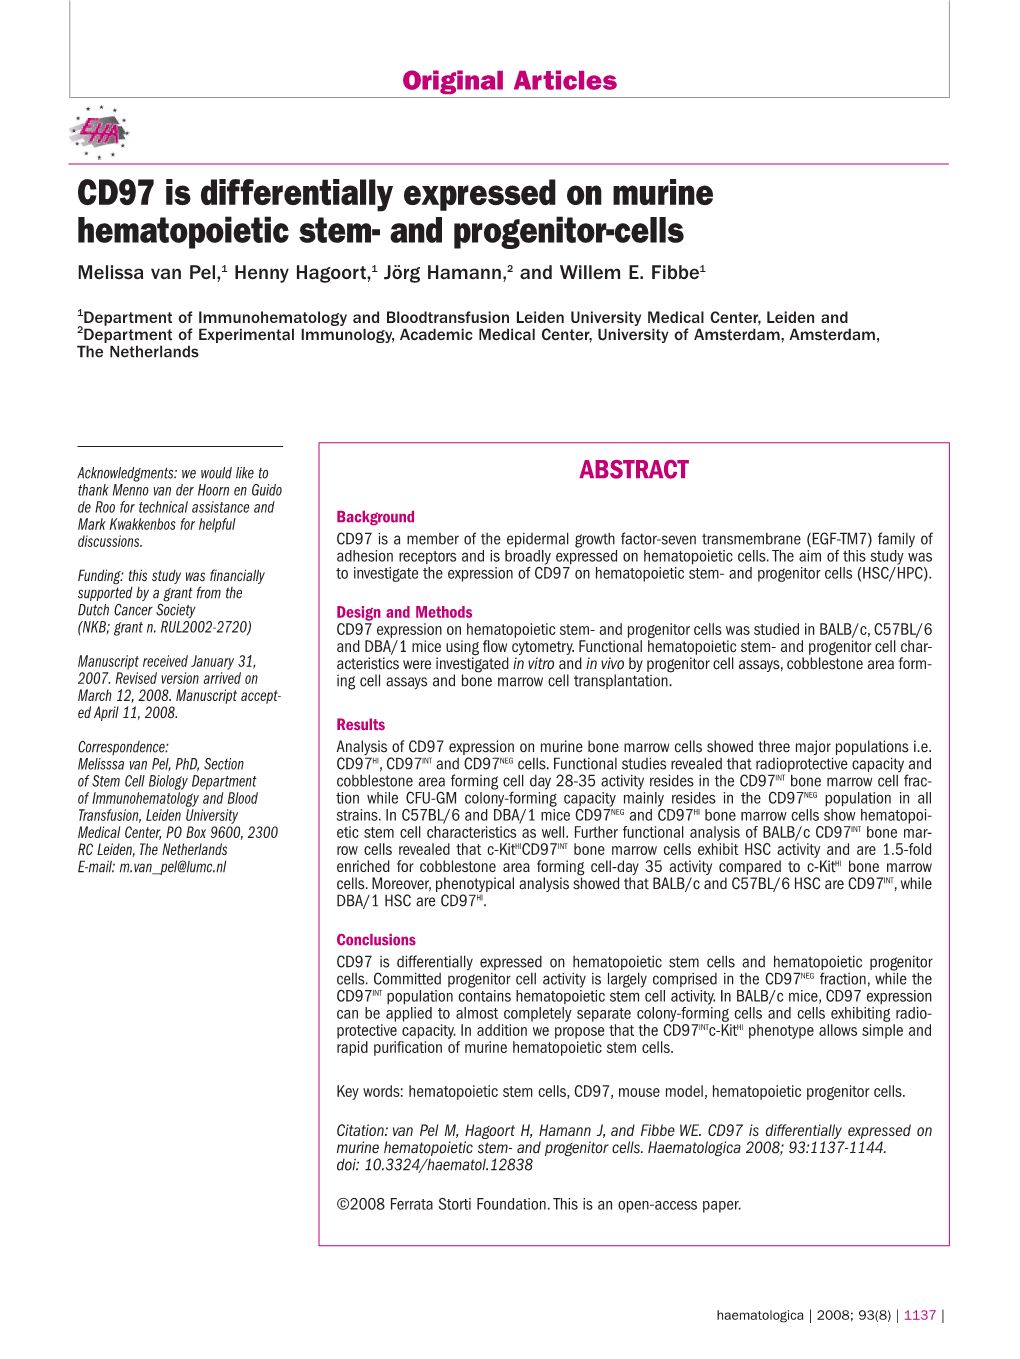 CD97 Is Differentially Expressed on Murine Hematopoietic Stem- and Progenitor-Cells Melissa Van Pel,1 Henny Hagoort,1 Jörg Hamann,2 and Willem E